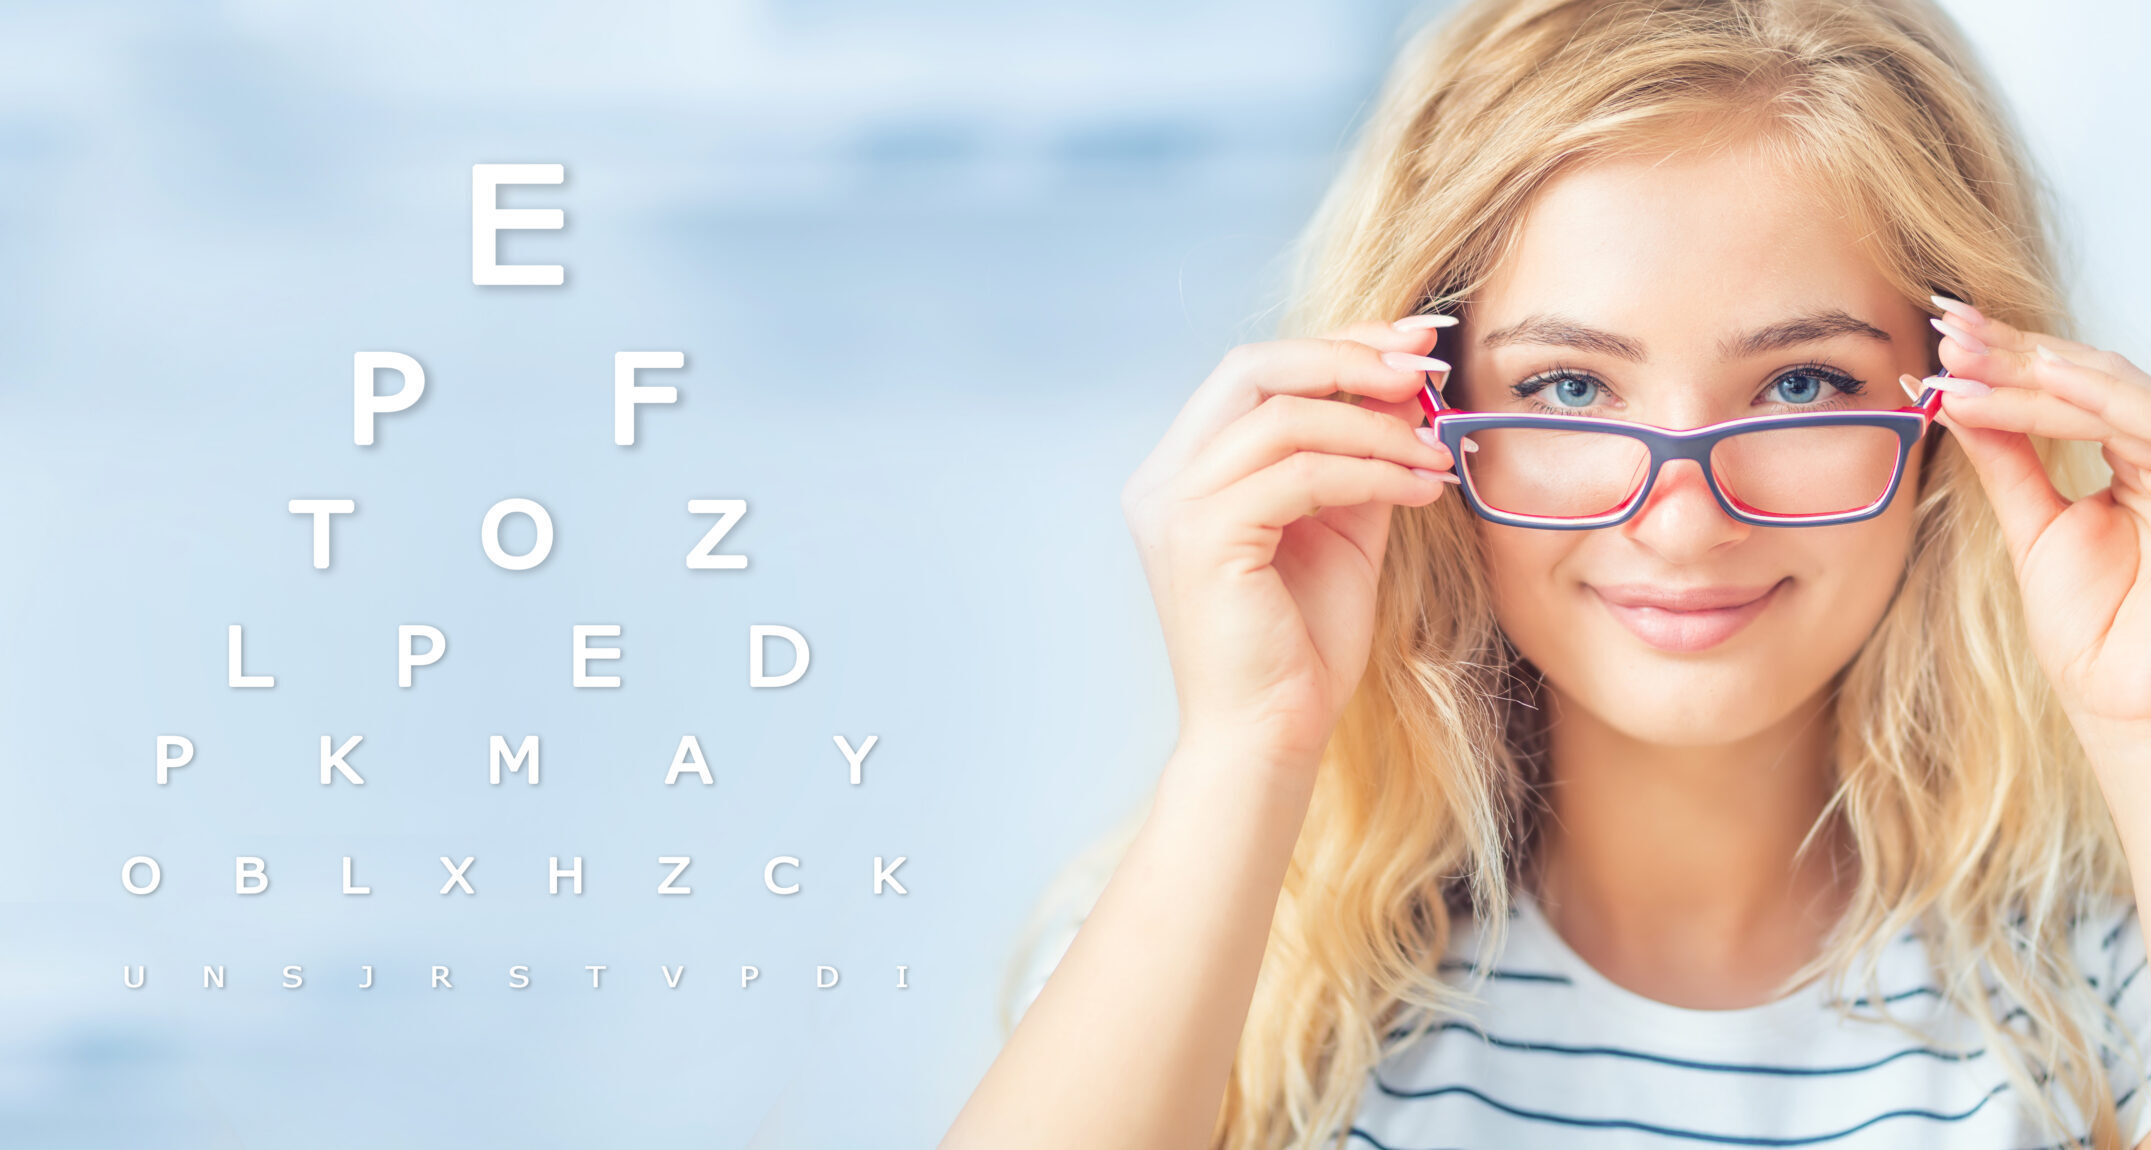 portrait young woman holding glasses looking camera ophthalmological concept with eye test chart scaled e1715188361351